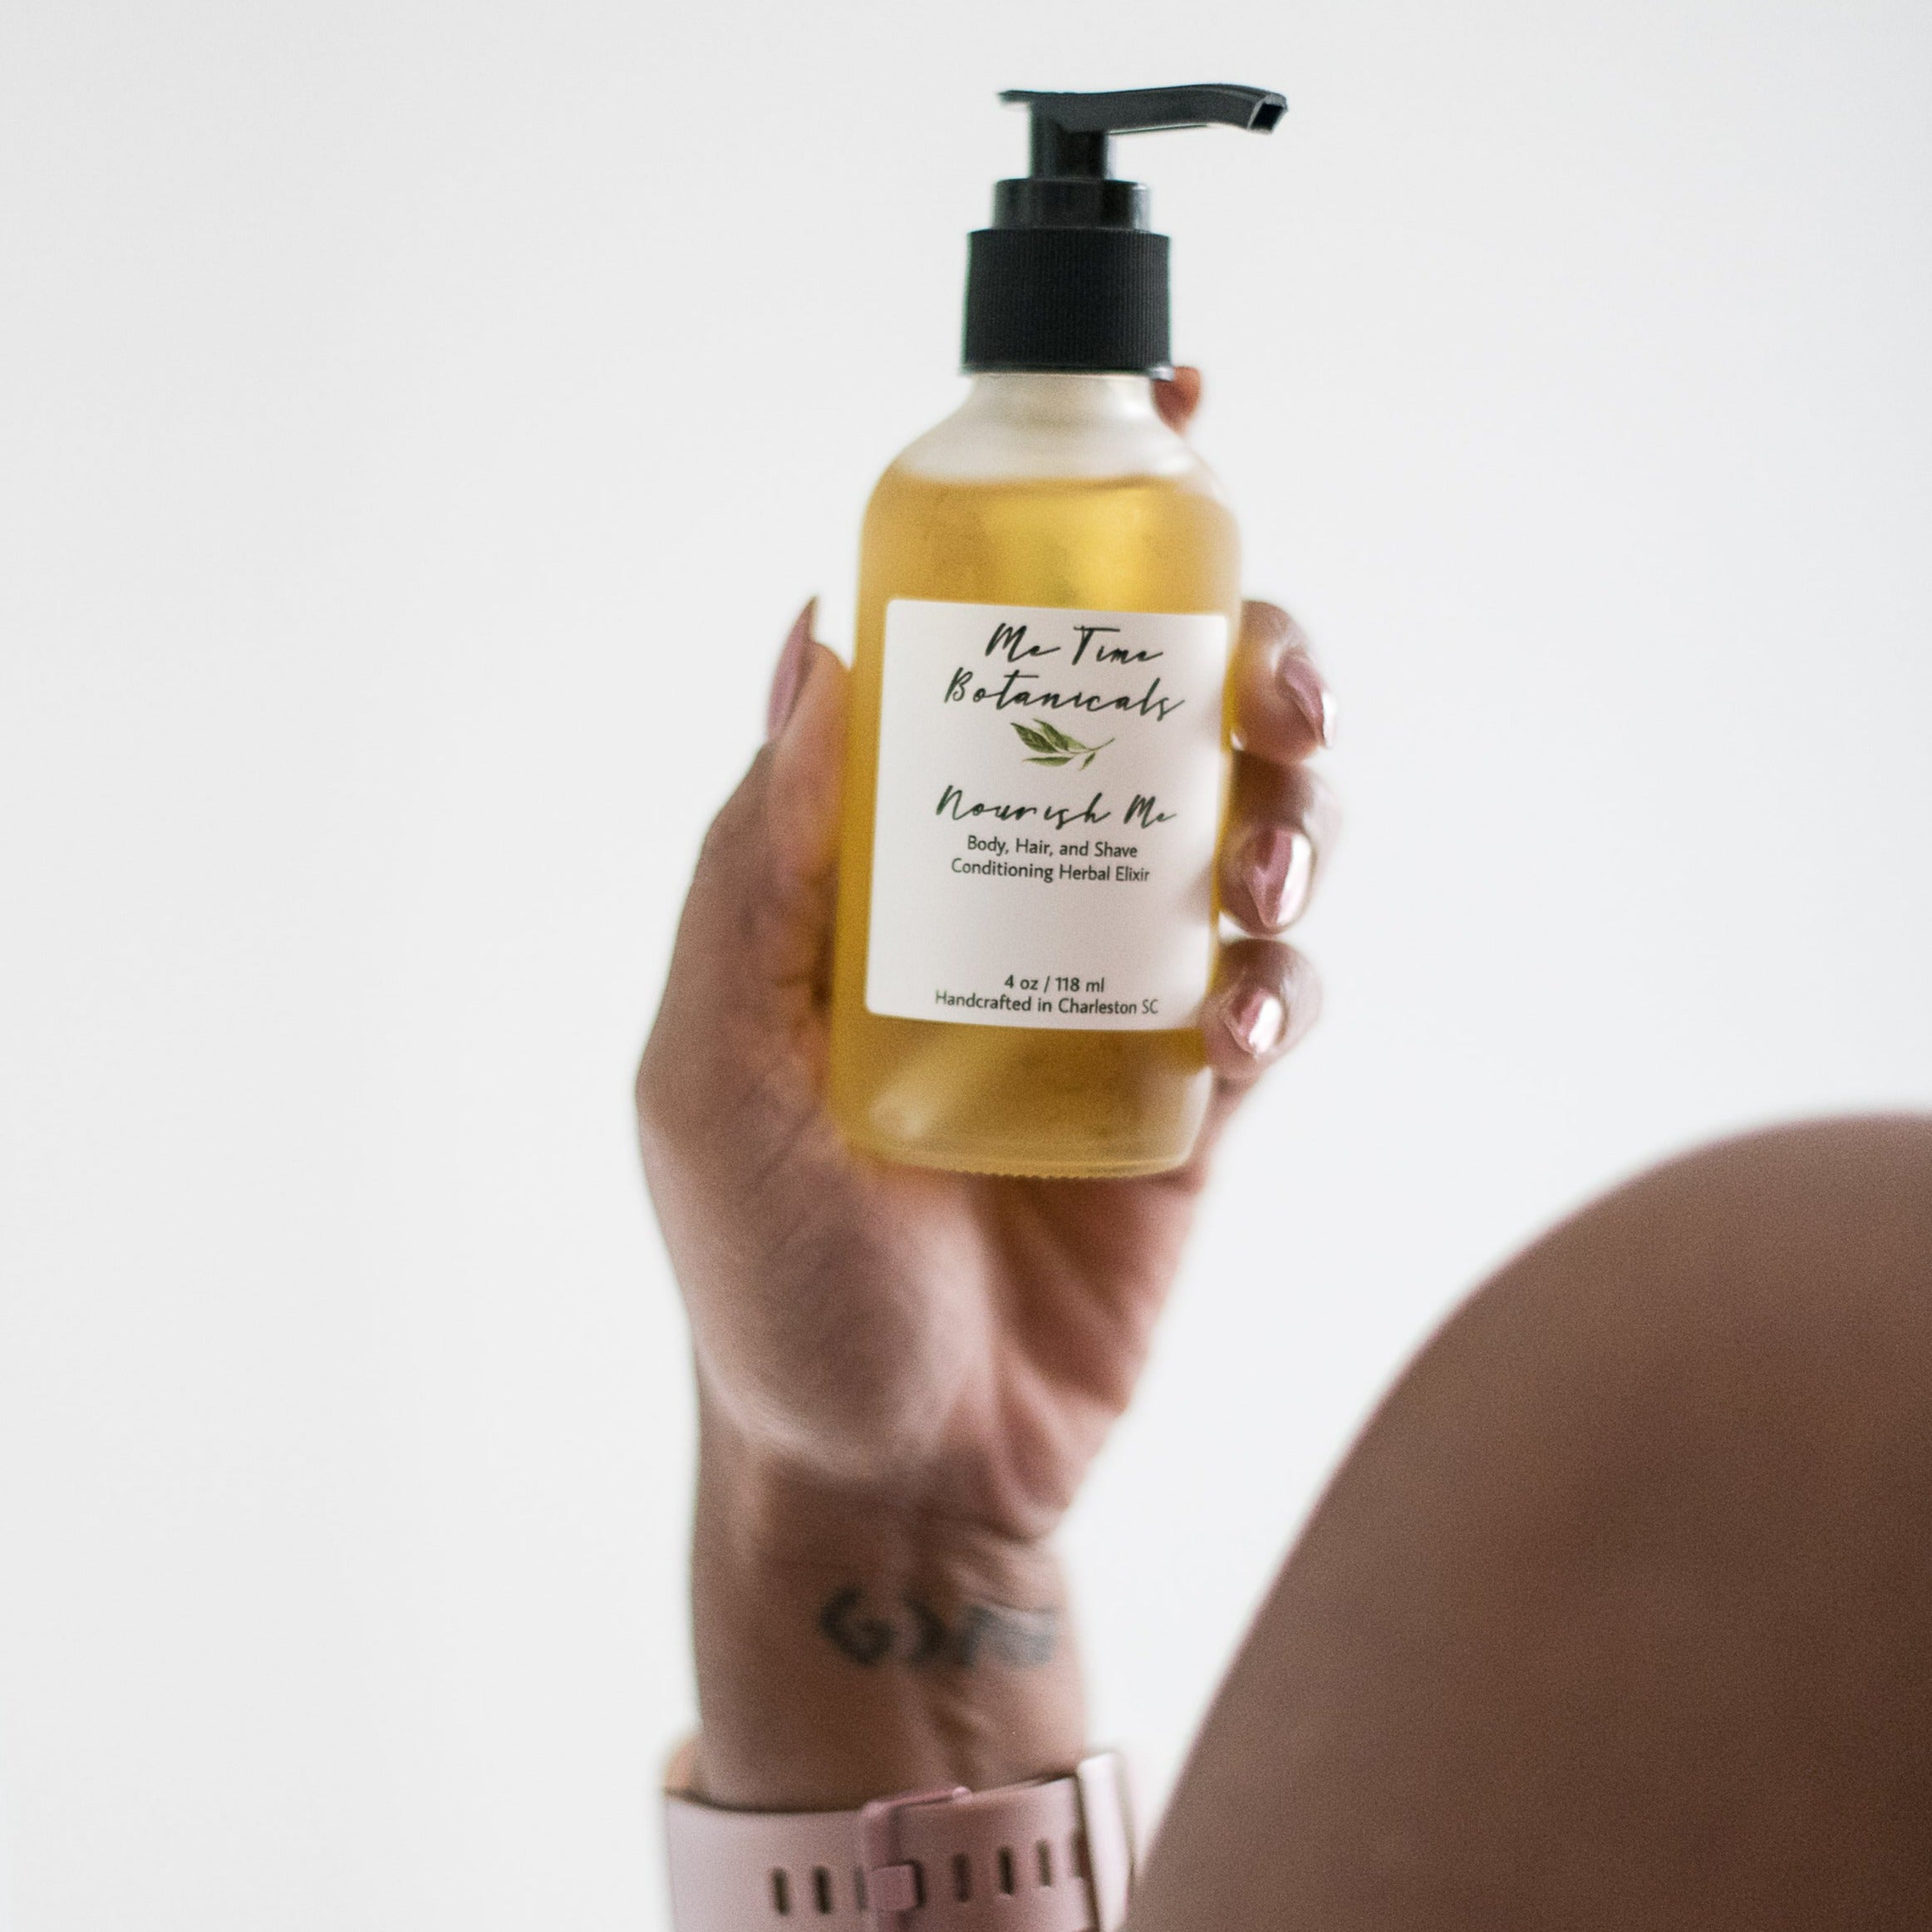 Me Time Botanicals Nourish Me Body Hair and Shave Oil